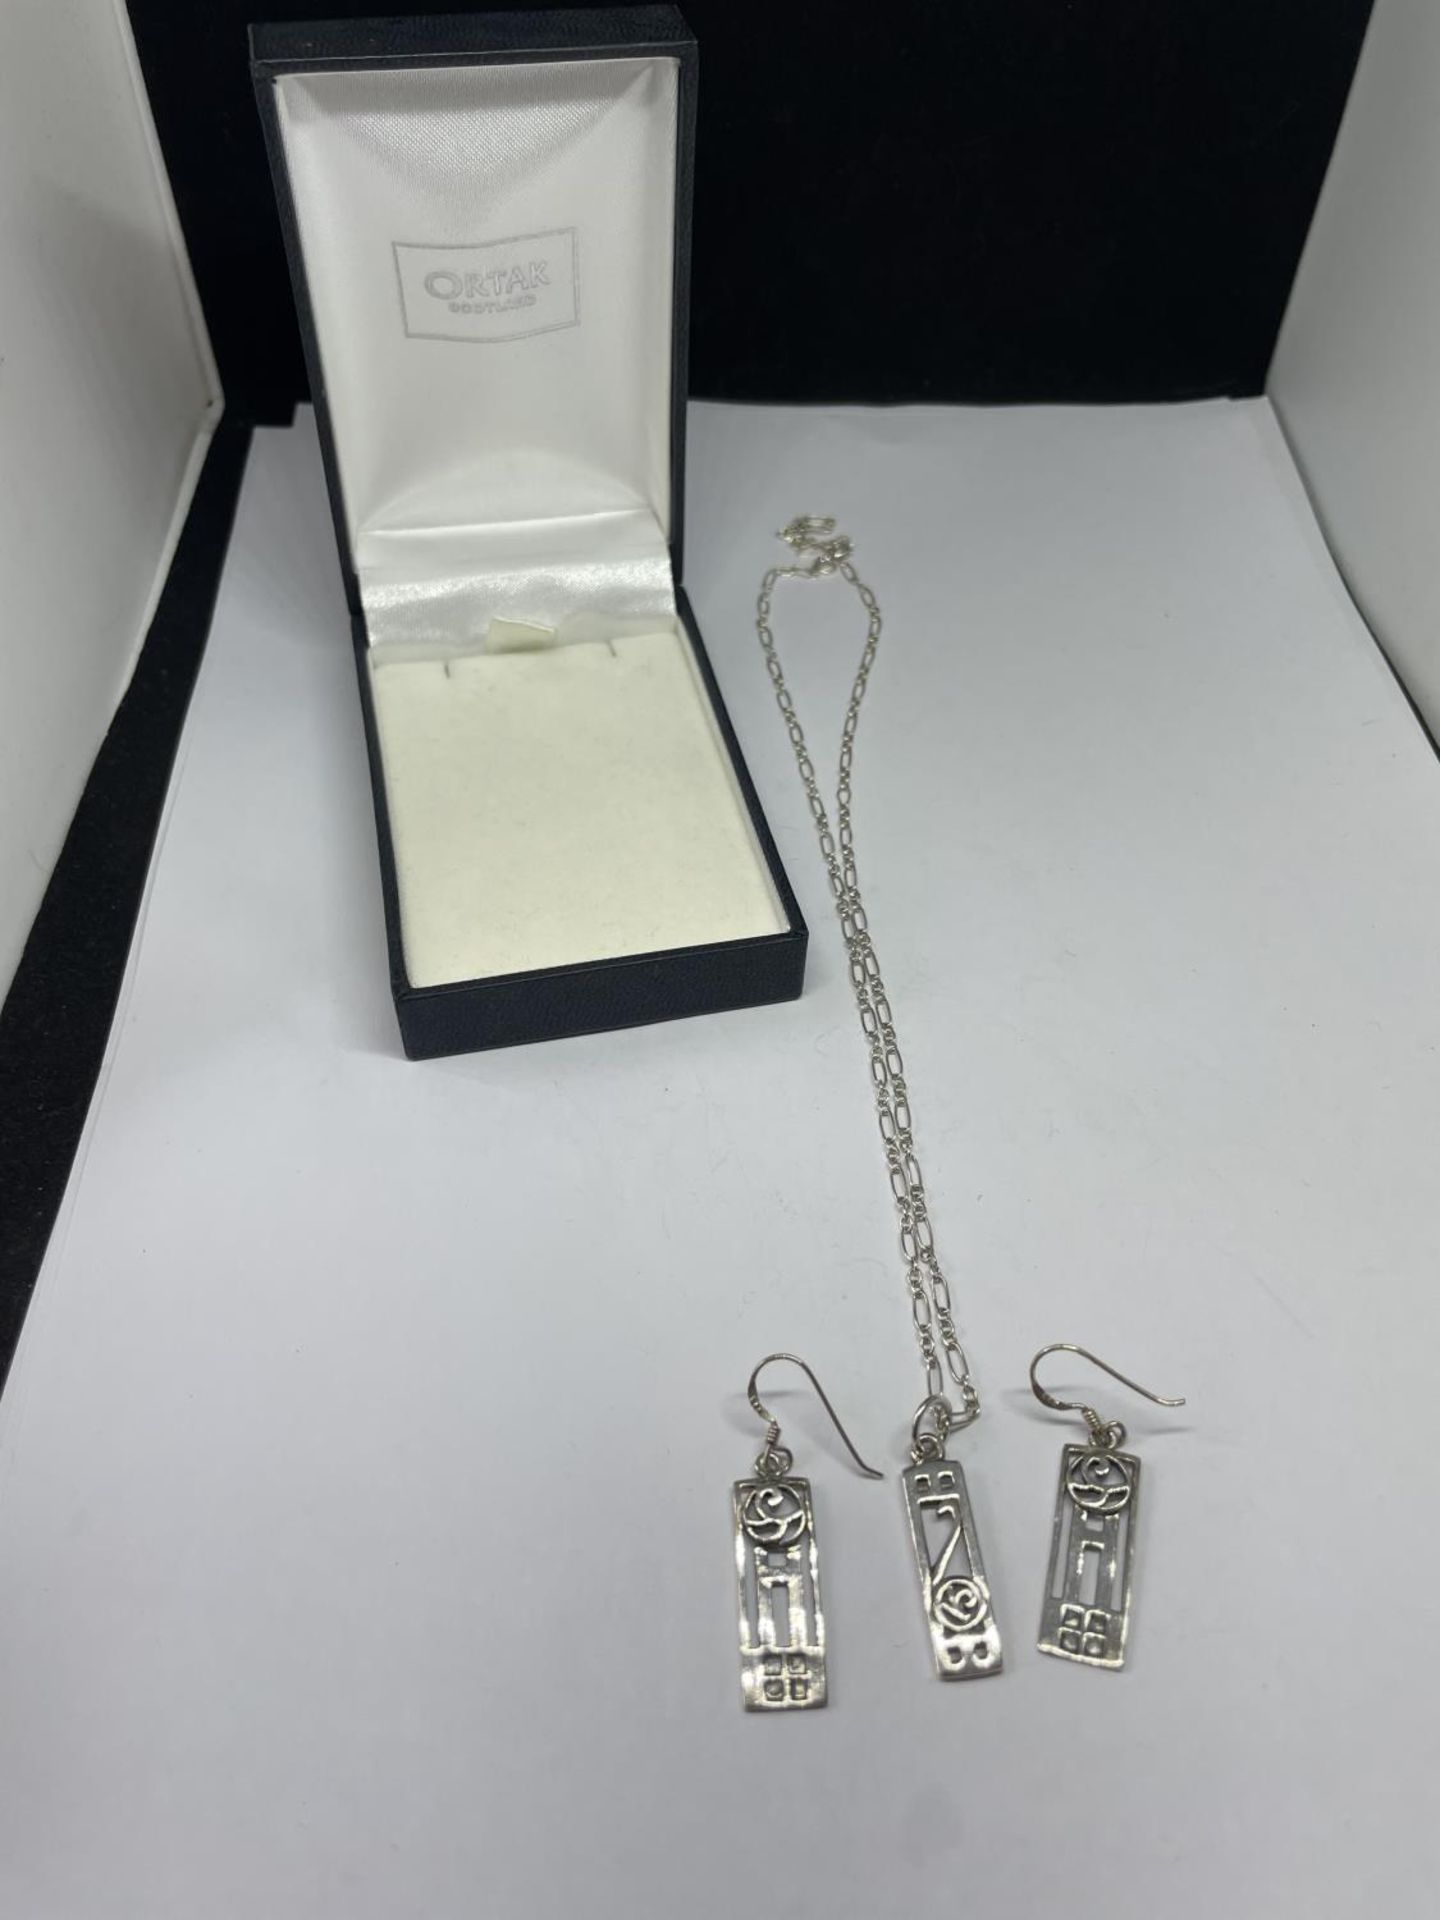 A SILVER MACINTOSH NECKLACE AND EARRINGS SET WITH A PRESENTATION BOX